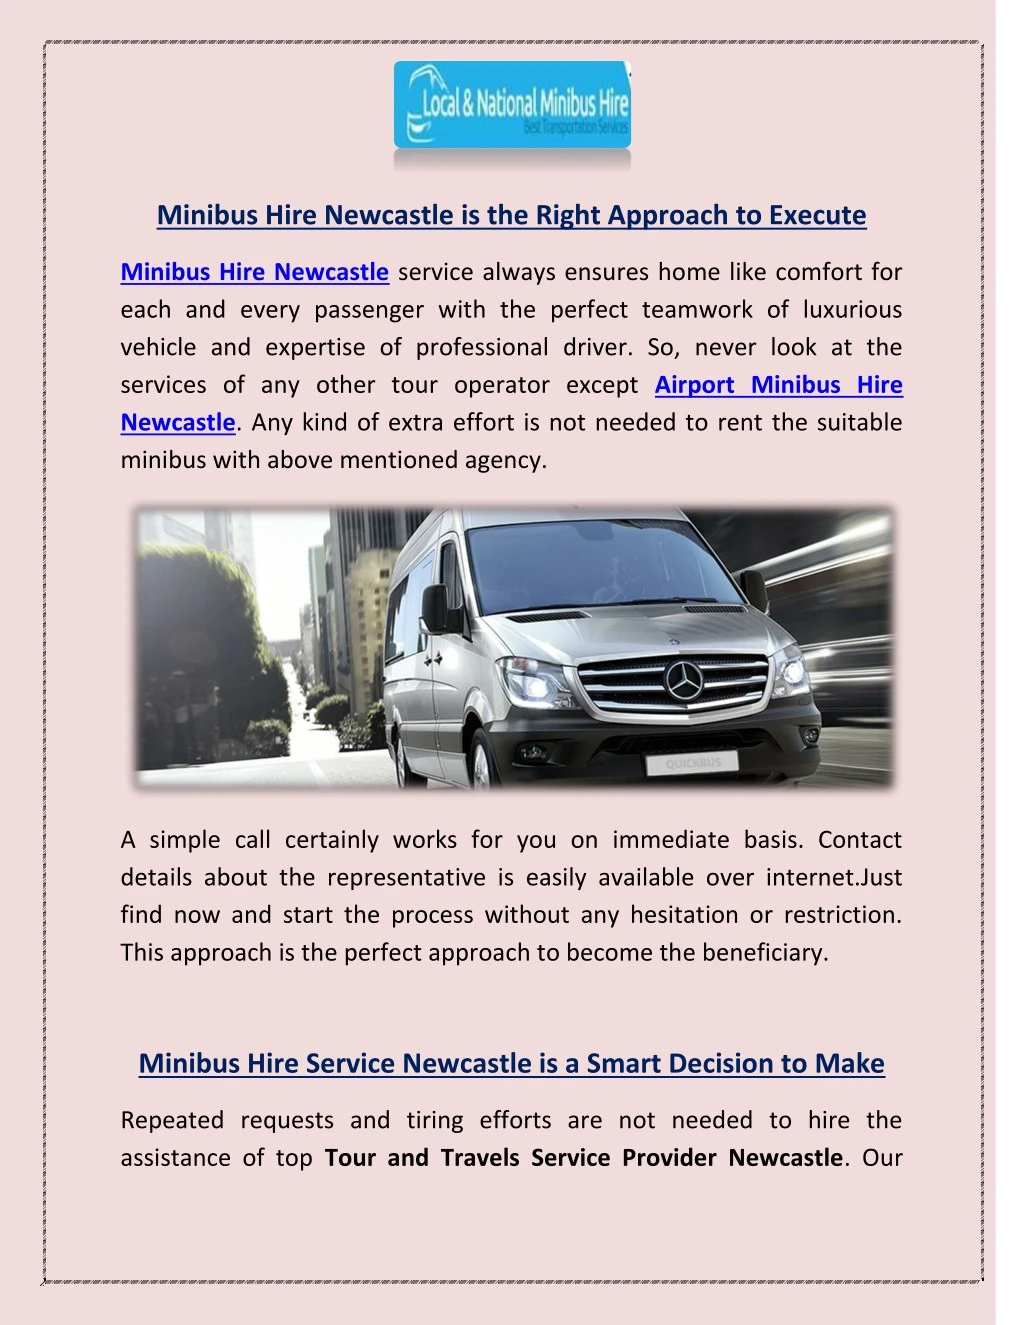 minibus hire newcastle is the right approach